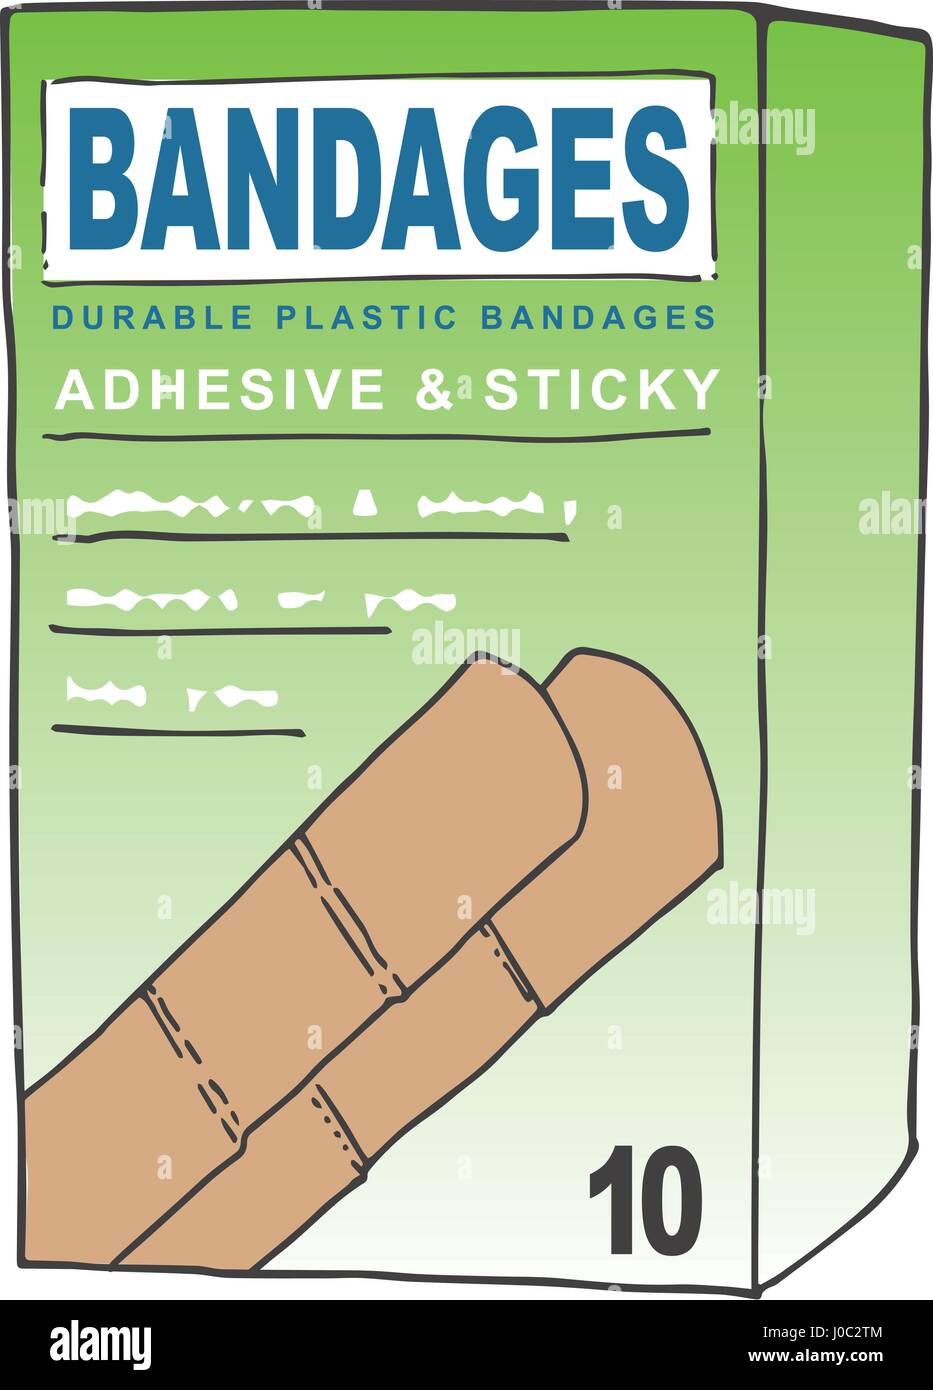 Adhesive Bandages for when you get a Cut or Scrape on your Skin. Stock Vector